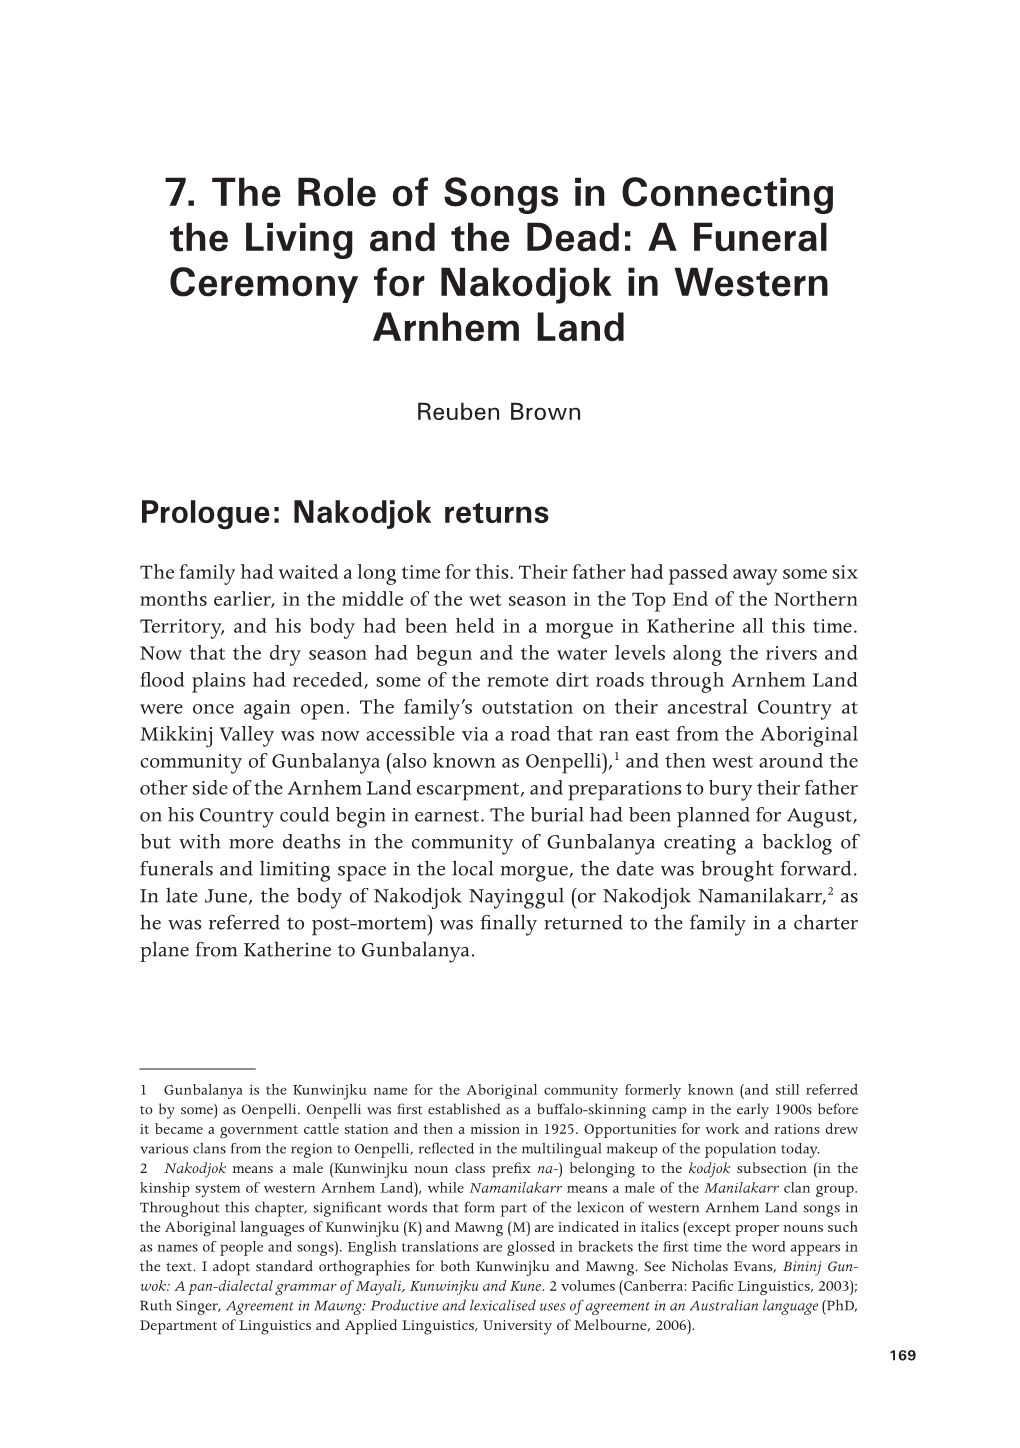 7. the Role of Songs in Connecting the Living and the Dead: a Funeral Ceremony for Nakodjok in Western Arnhem Land